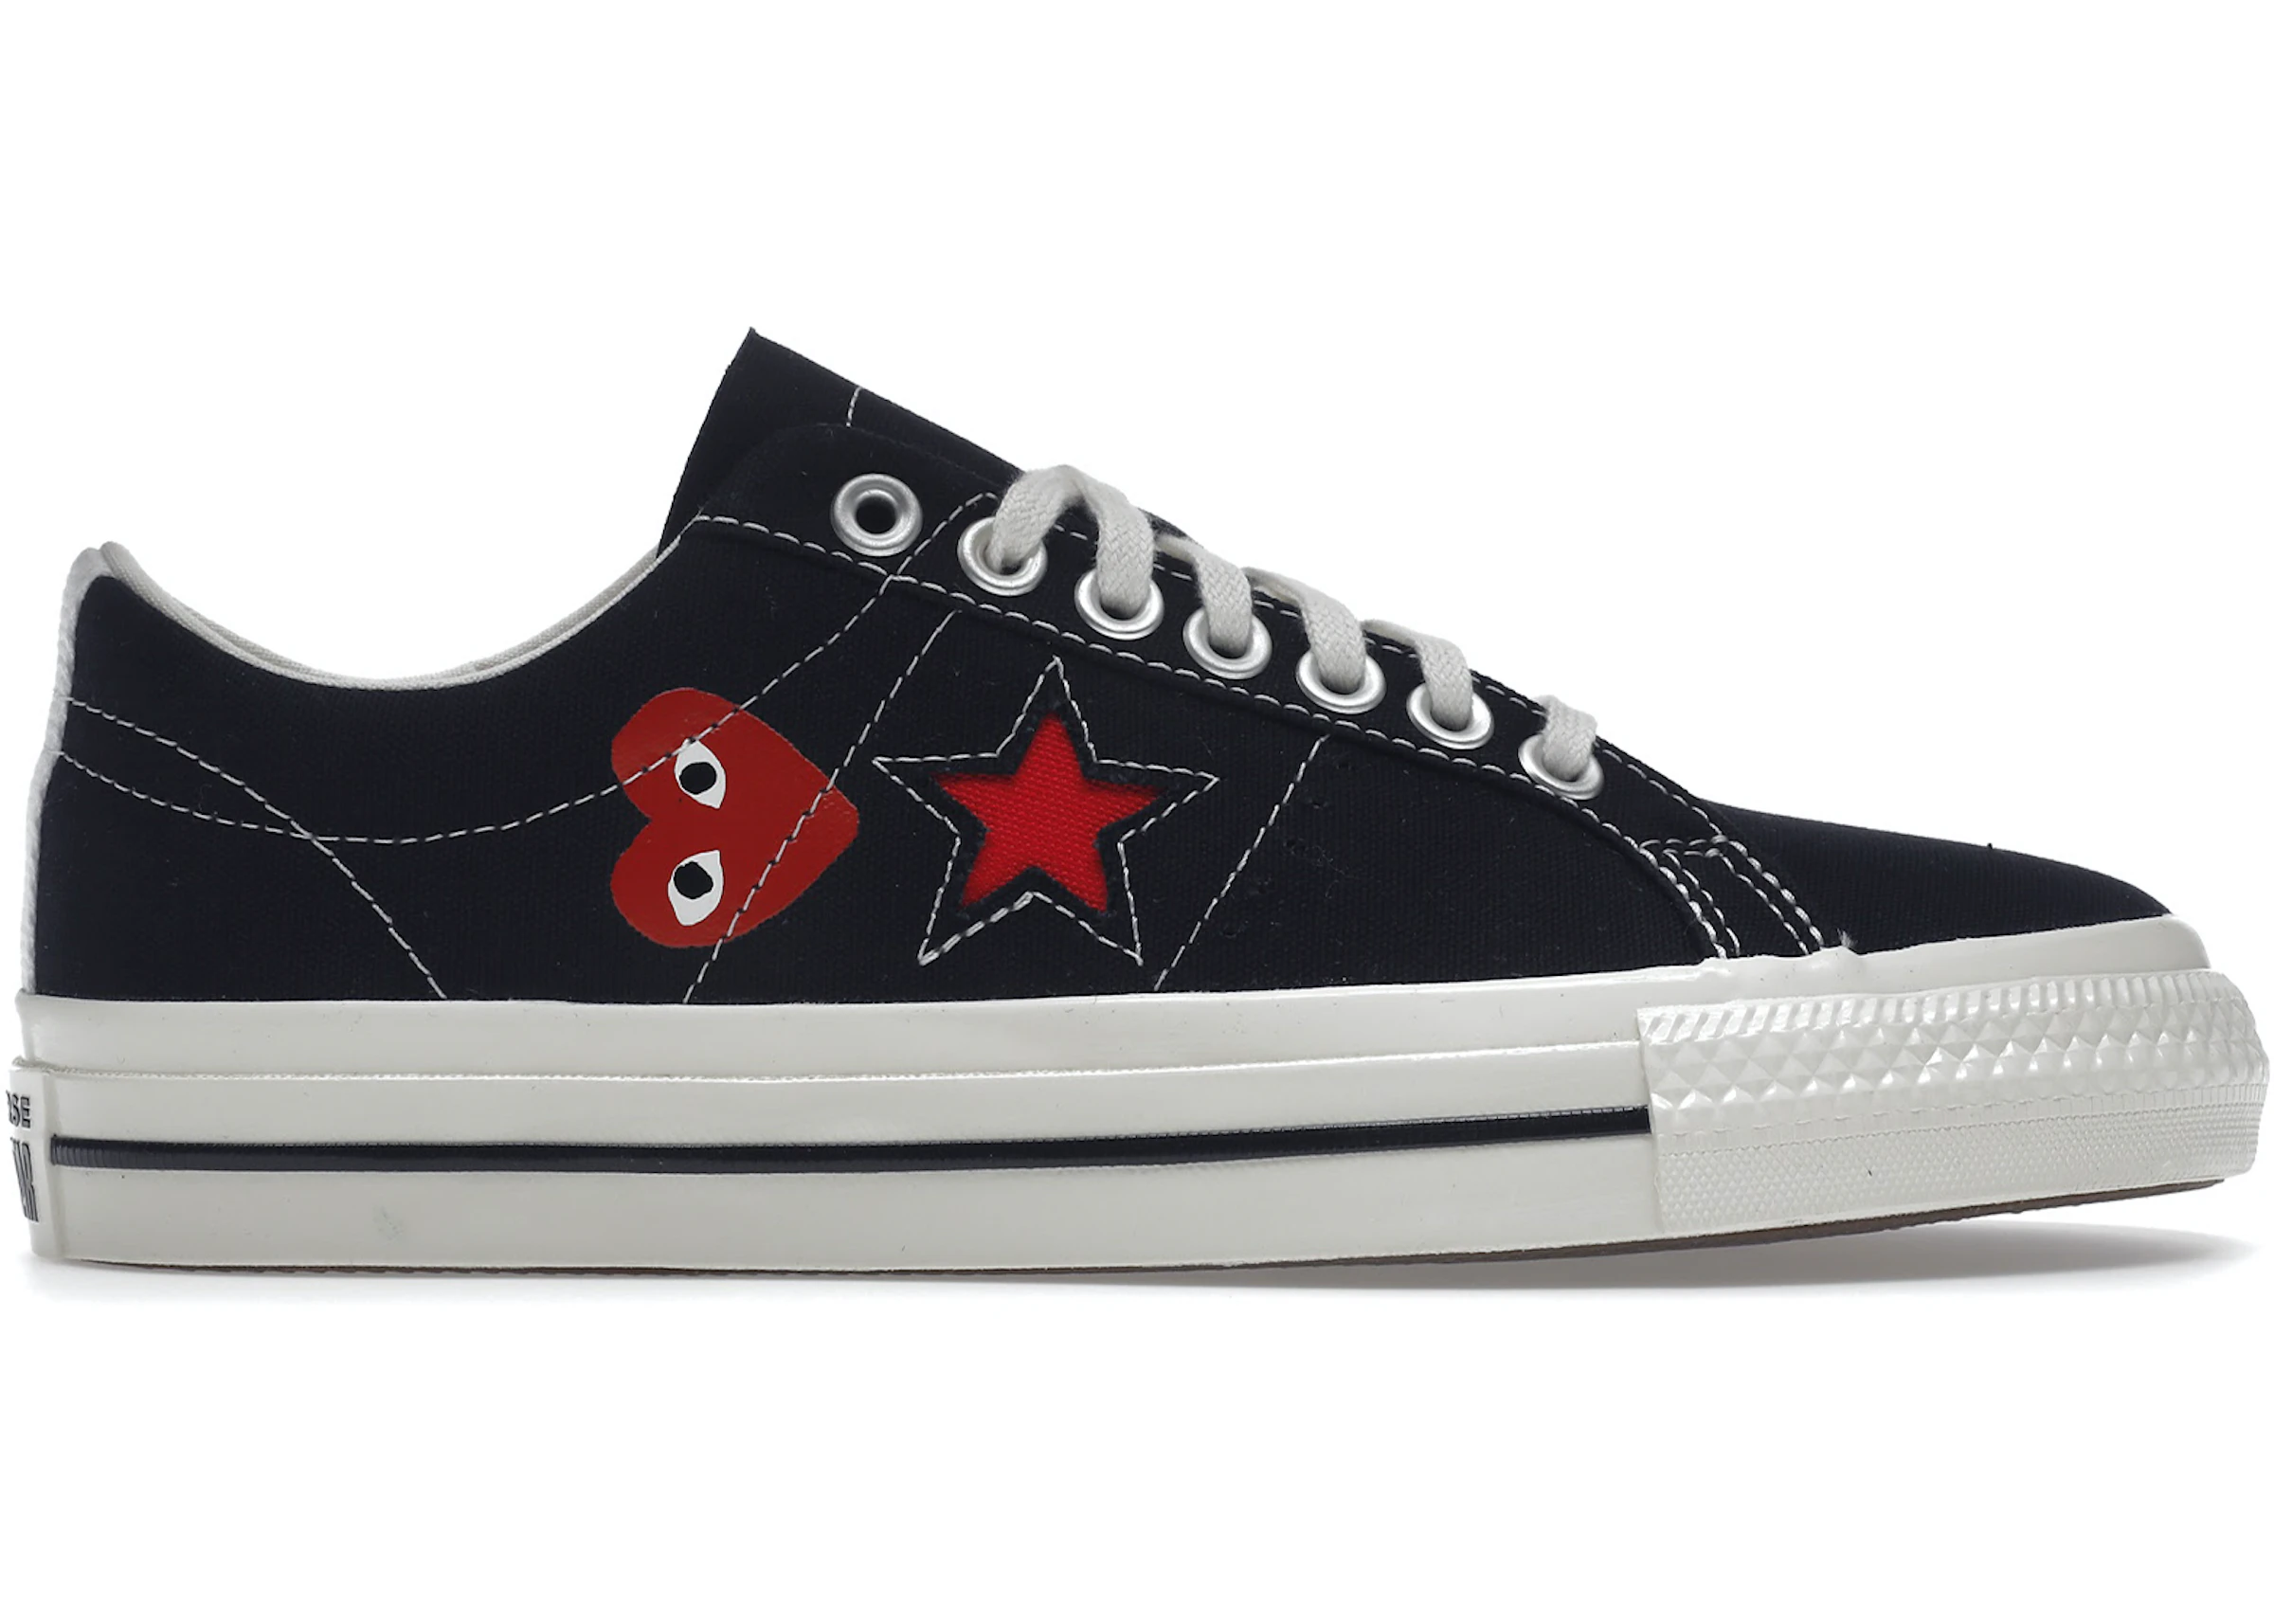 Converse One Star Ox Comme des Garcons PLAY Black - A01791C - US